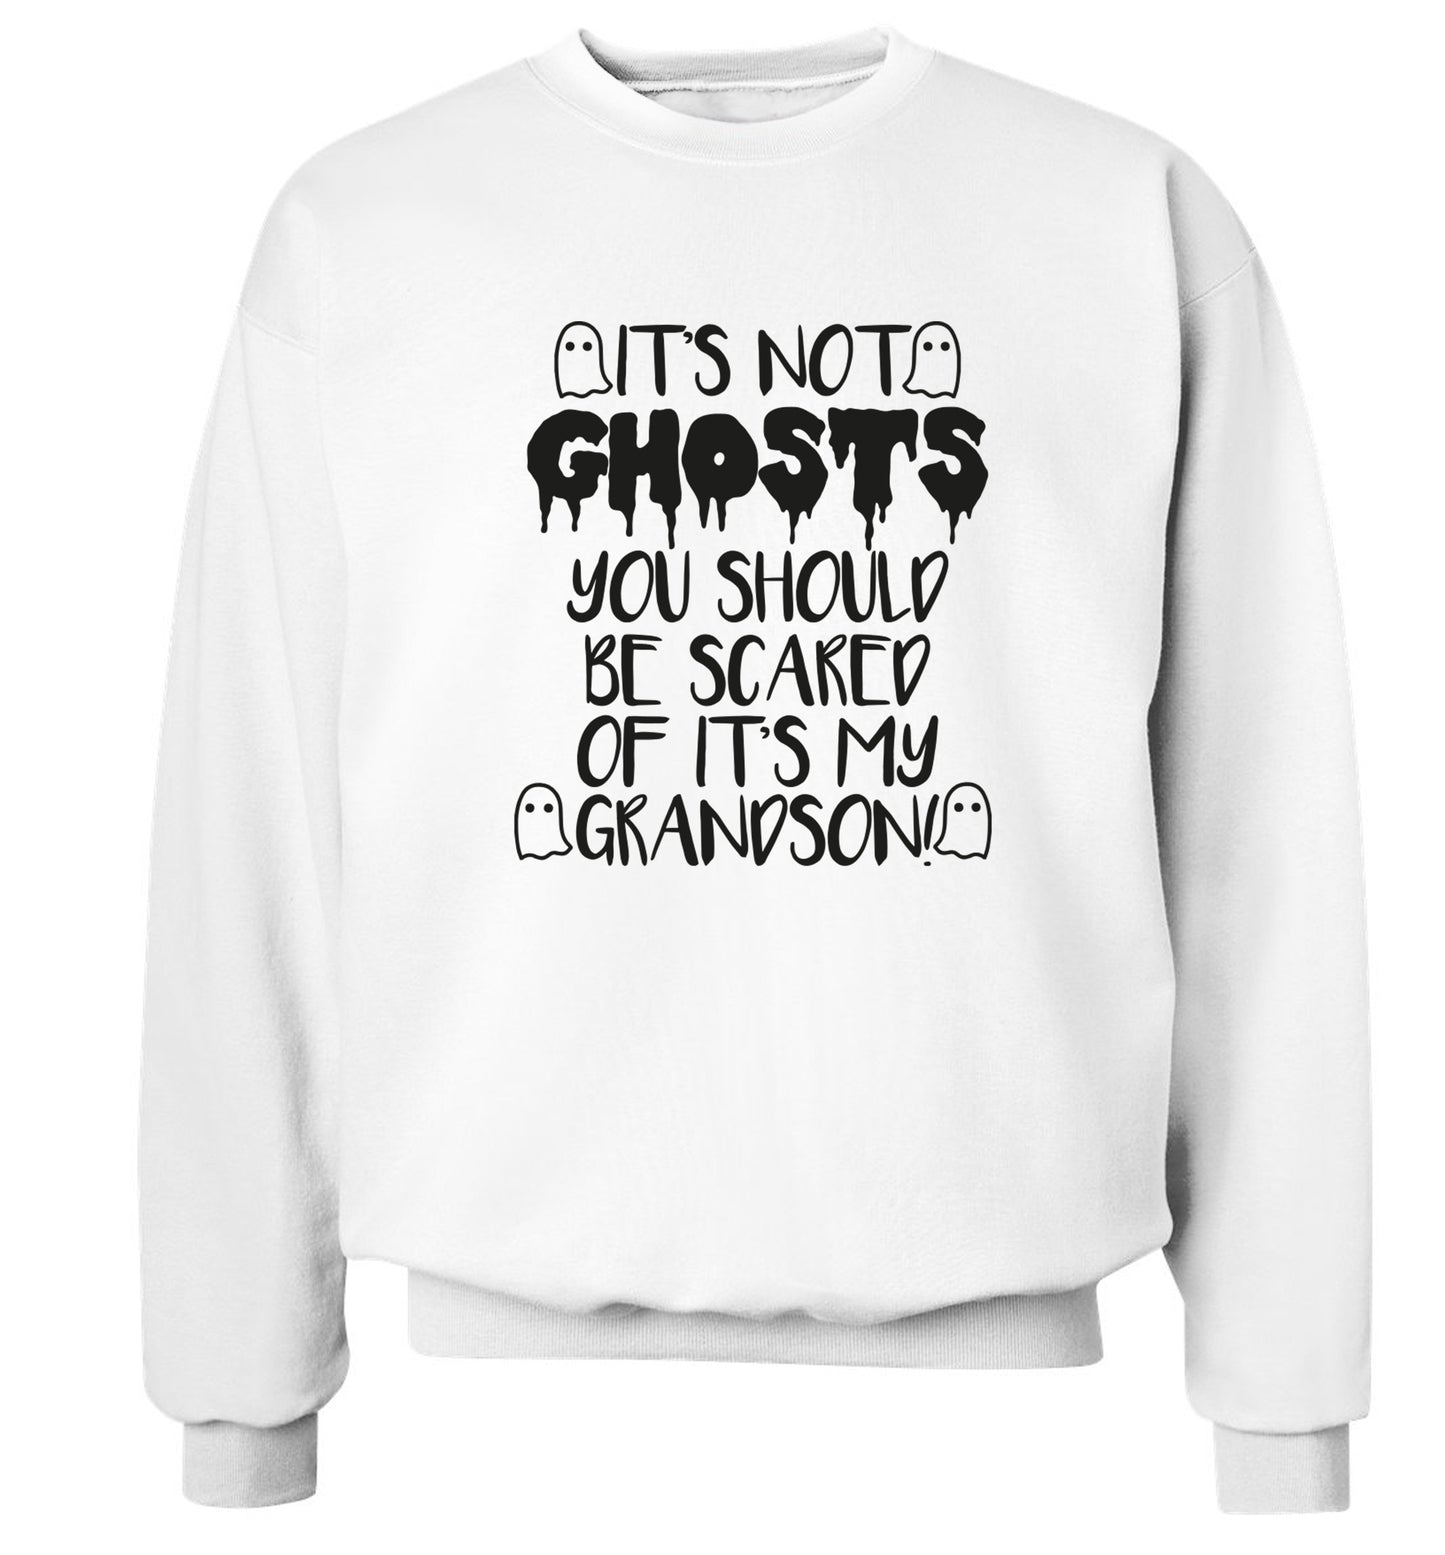 It's not ghosts you should be scared of it's my grandson! Adult's unisex white Sweater 2XL